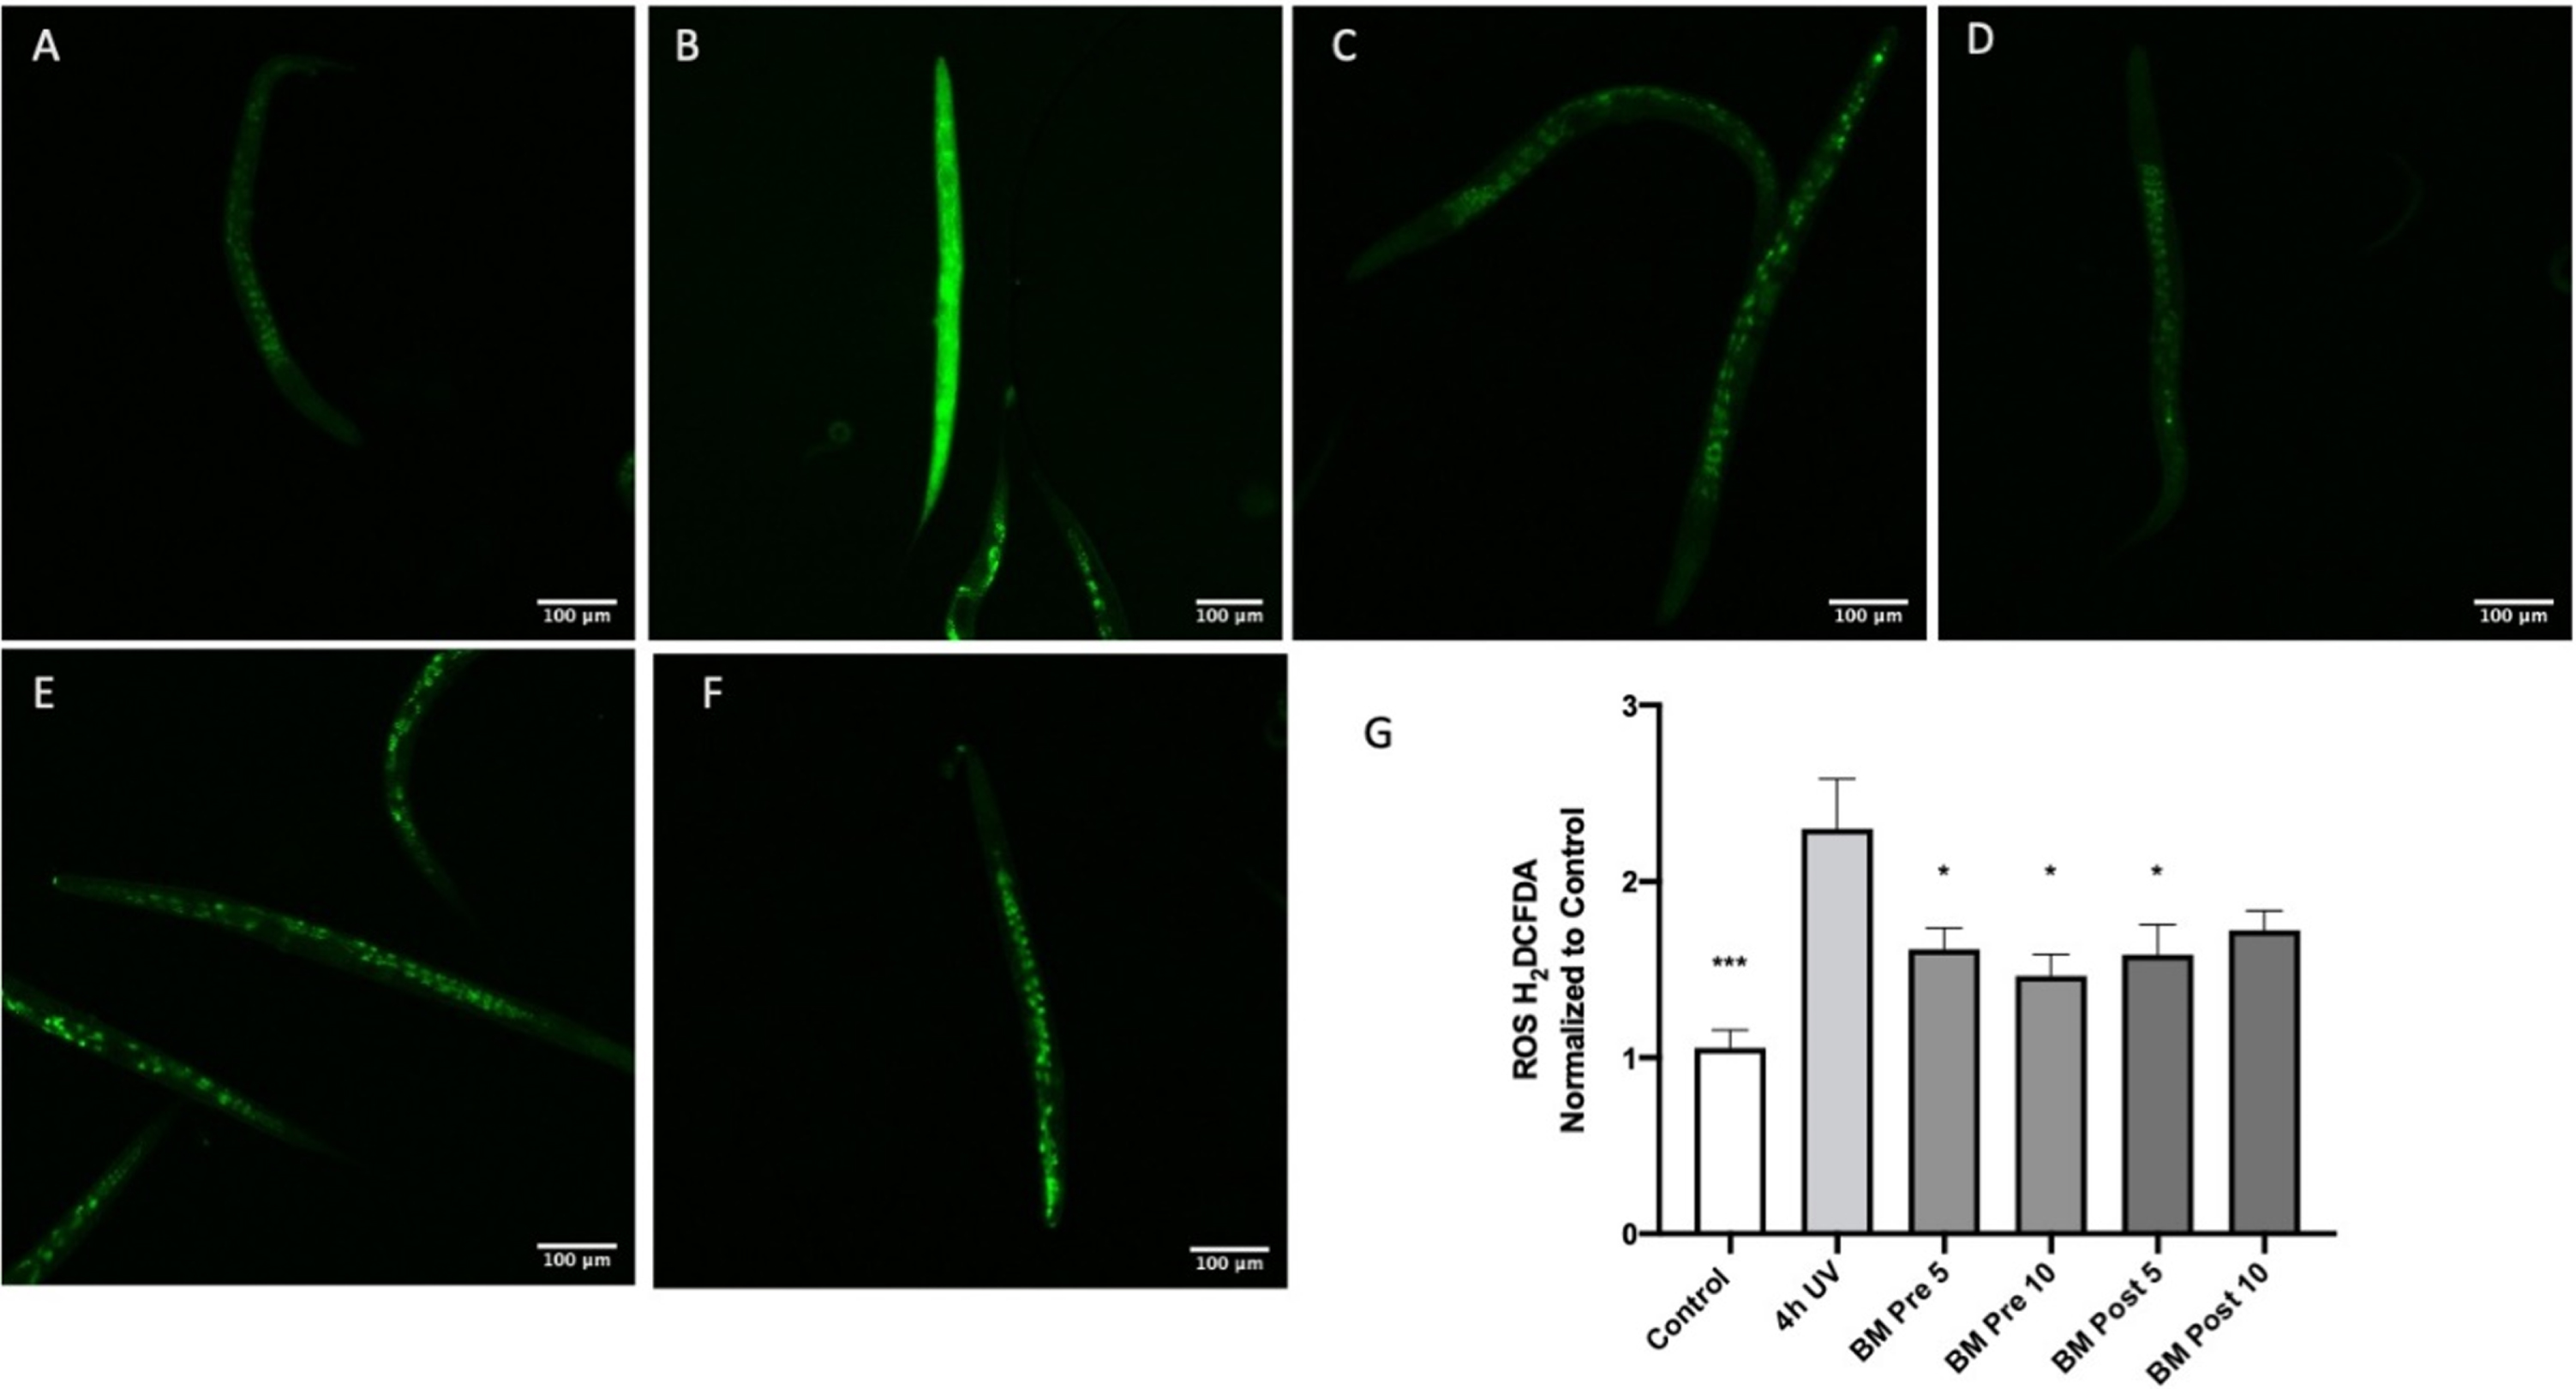 The antioxidant effect of BM in worms exposed to UV-A: A Control; B Four hours of UV-A exposure; C Pretreatment with BM 5 μg/ml and four hours of UV-A exposure; D Pretreatment with BM 10 μg/ml and four hours of UV-A exposure; E Four hours of UV-A exposure, followed by treatment with BM 5 μg/ml; F Four hours of UV-A exposure, followed by treatment with BM 10 μg/ml; G Image J analysis of H2CDFDA fluorescence normalized to control worms. *p < 0.05, ***p < 0.001 using ANOVA followed by Dunnett’s post hoc multiple comparisons test.